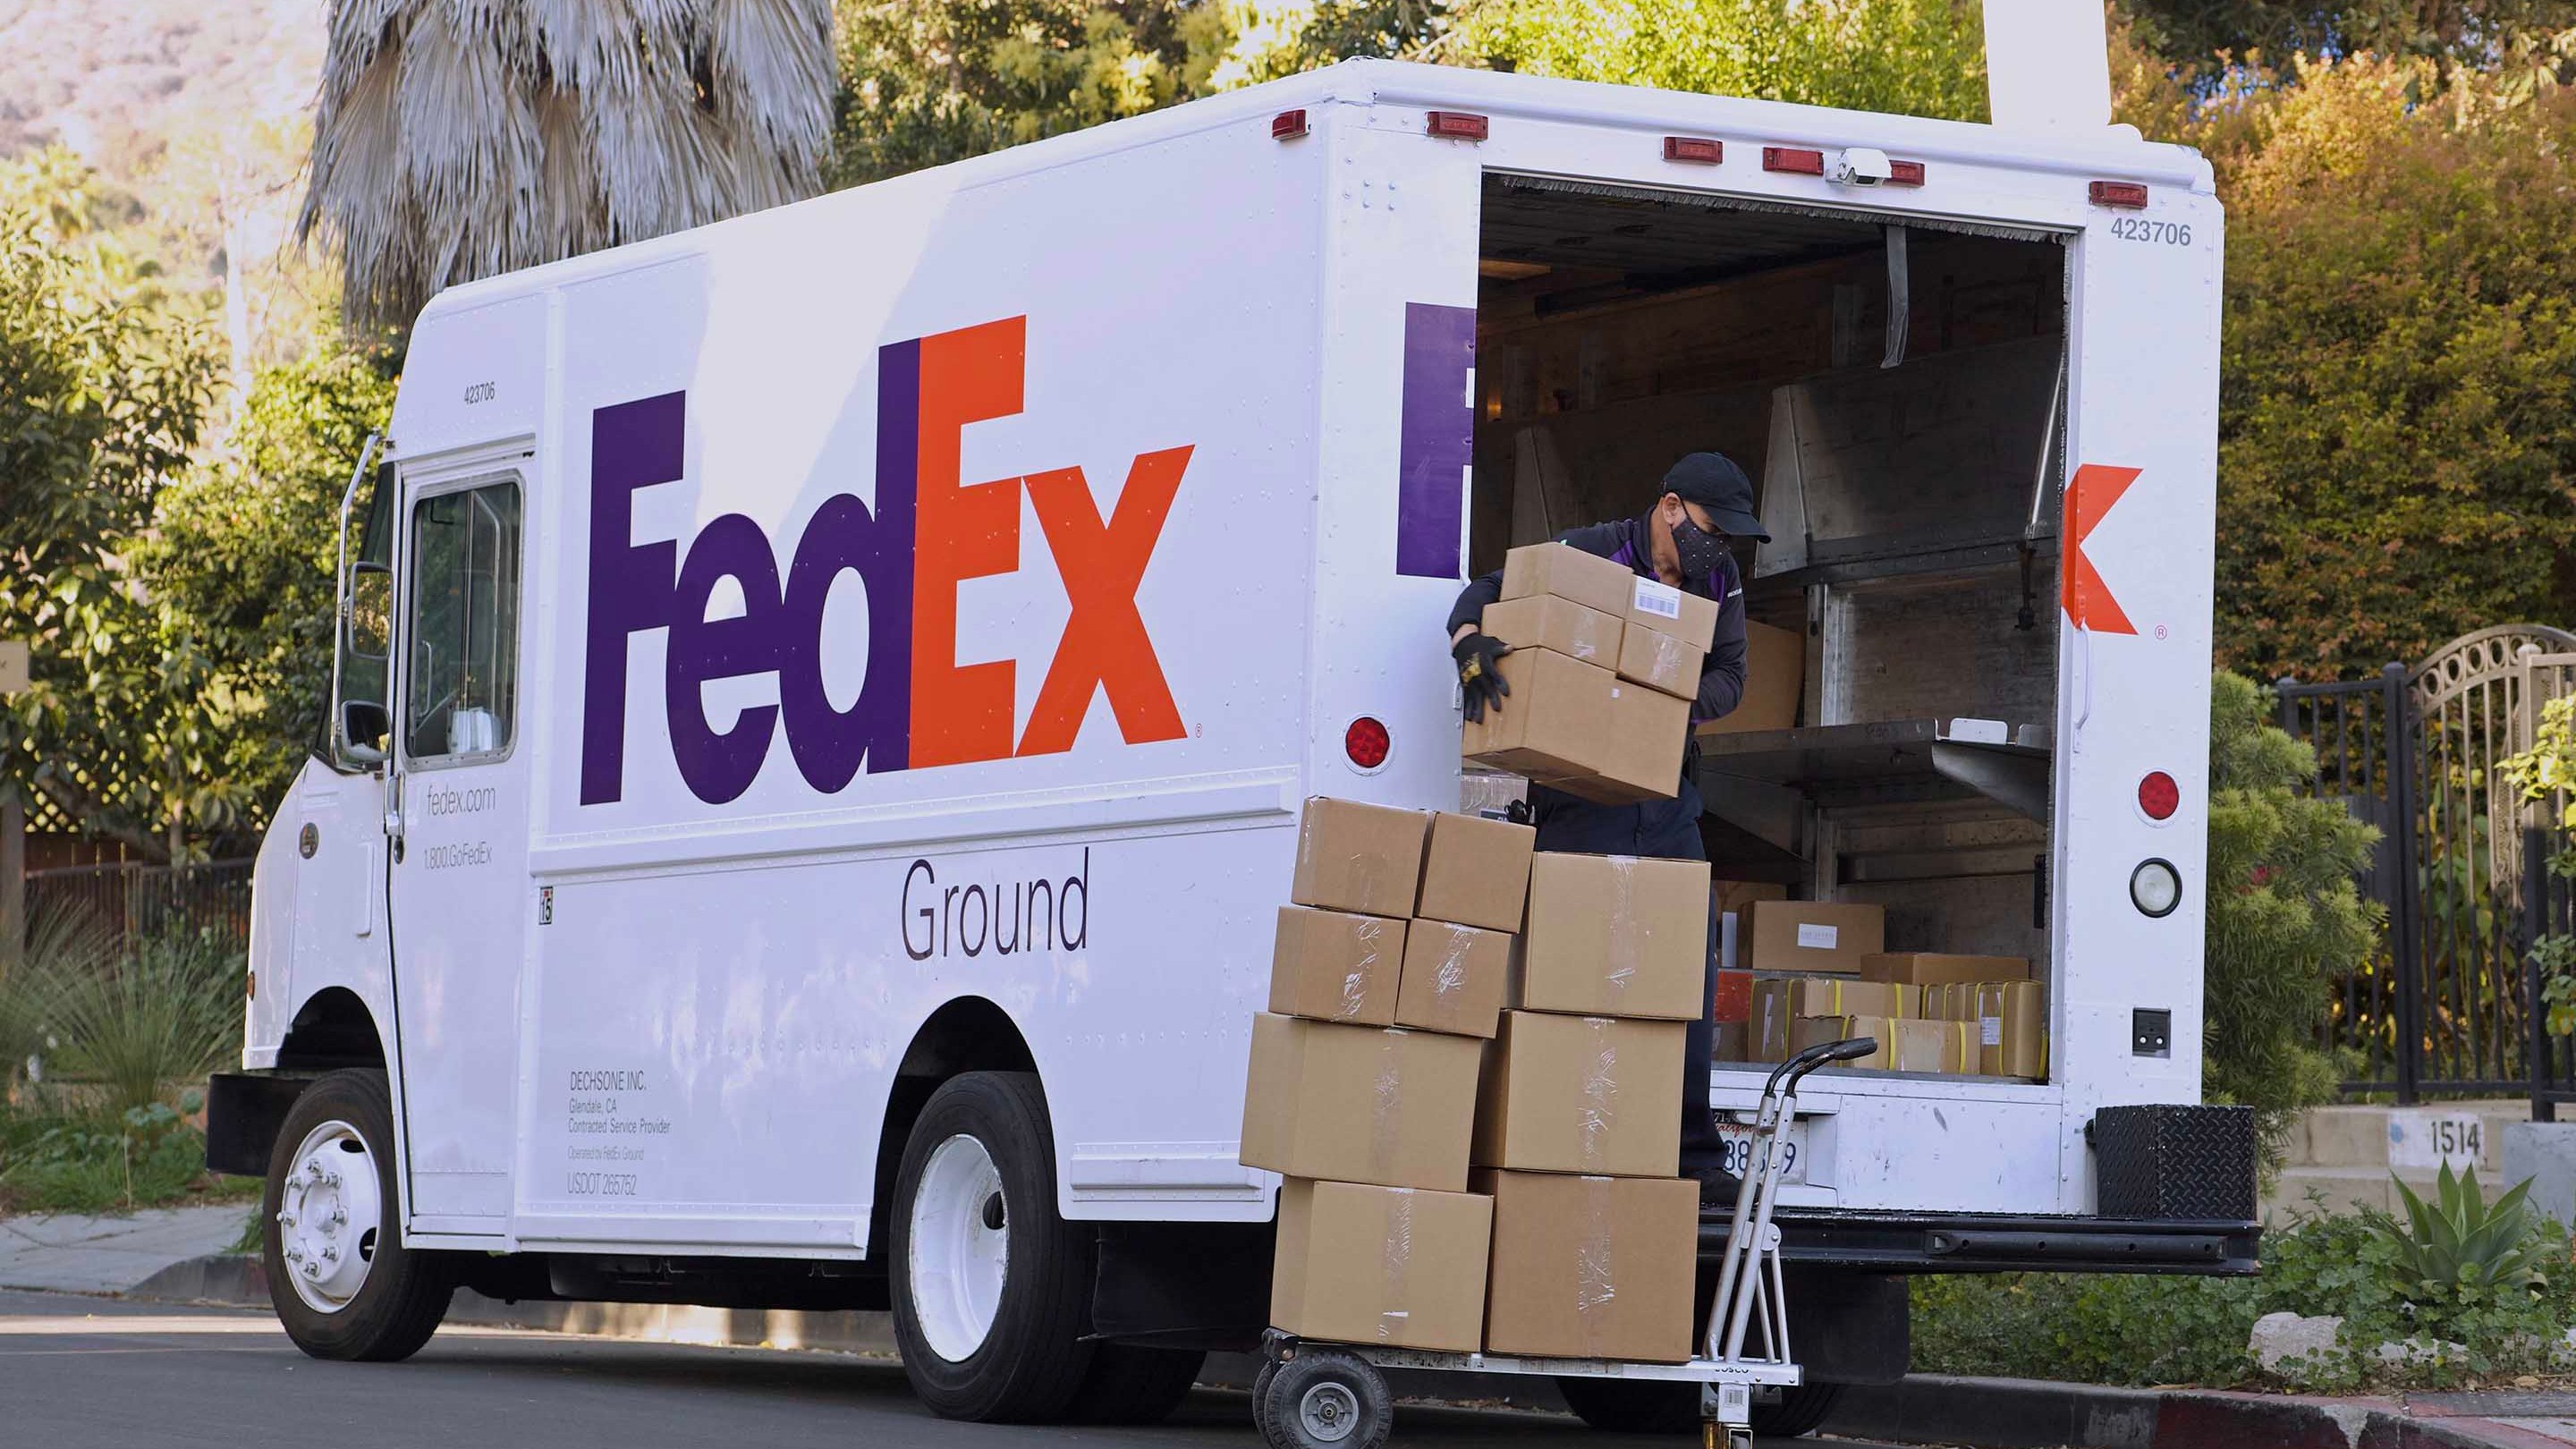 Holiday Shipping Deadlines for UPS, USPS, FedEx